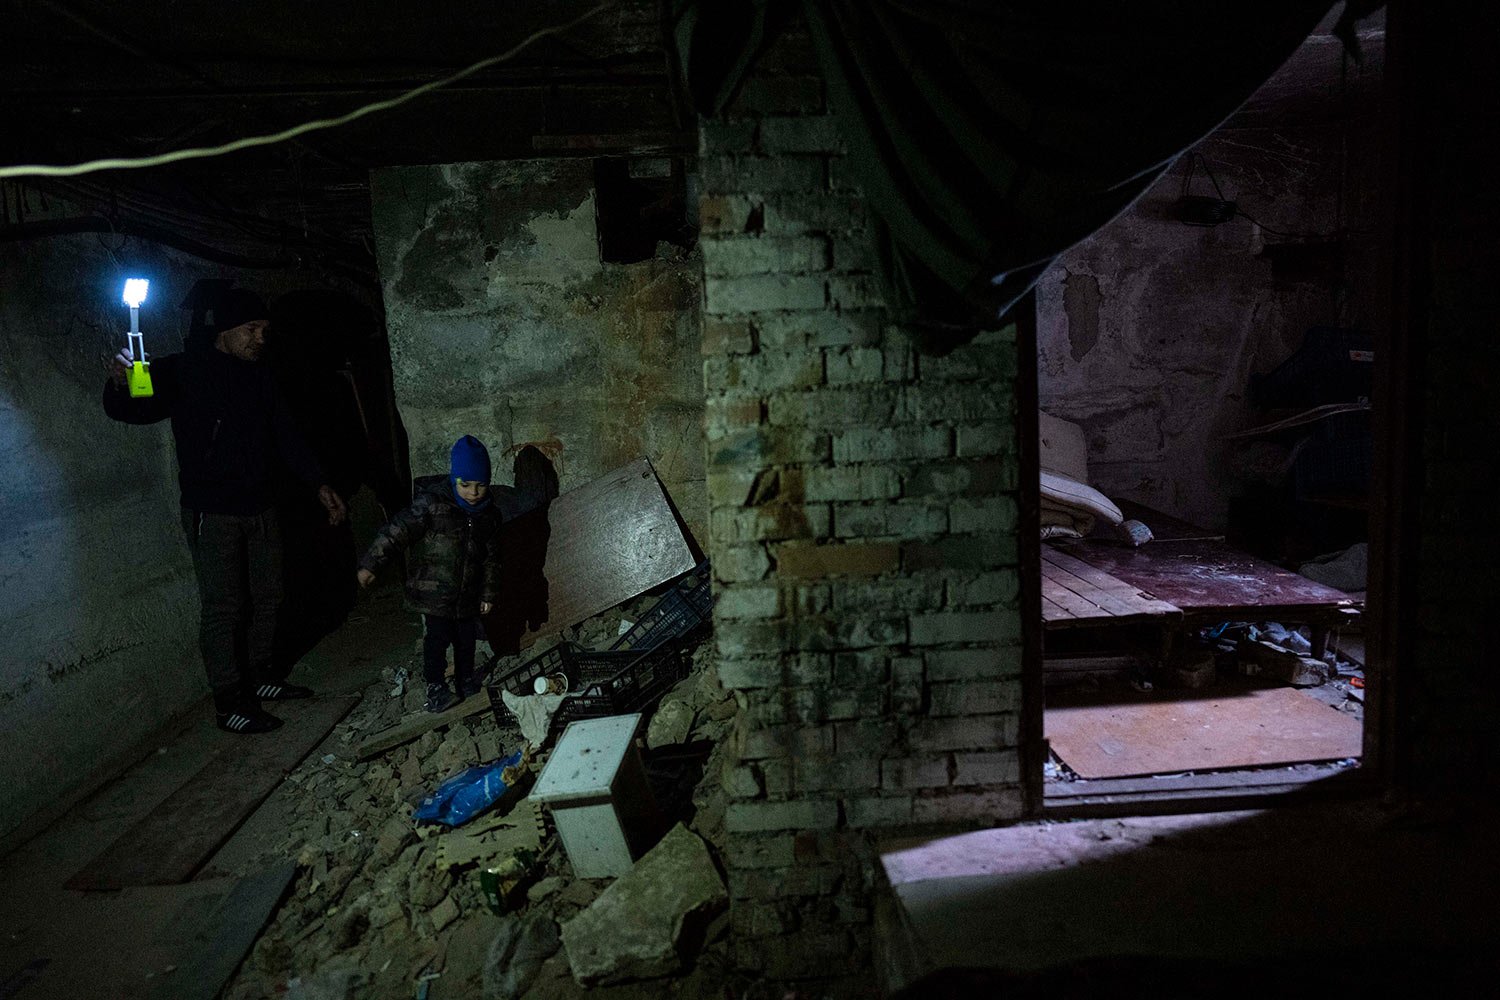  Vlad, 6, walks with his father Ivan, 40, inside the basement where they lived during the war in Bucha, on the outskirts of Kyiv, Ukraine, Friday, April 8, 2022. Vlad's mother died during the confinement in a basement for more than a month during the